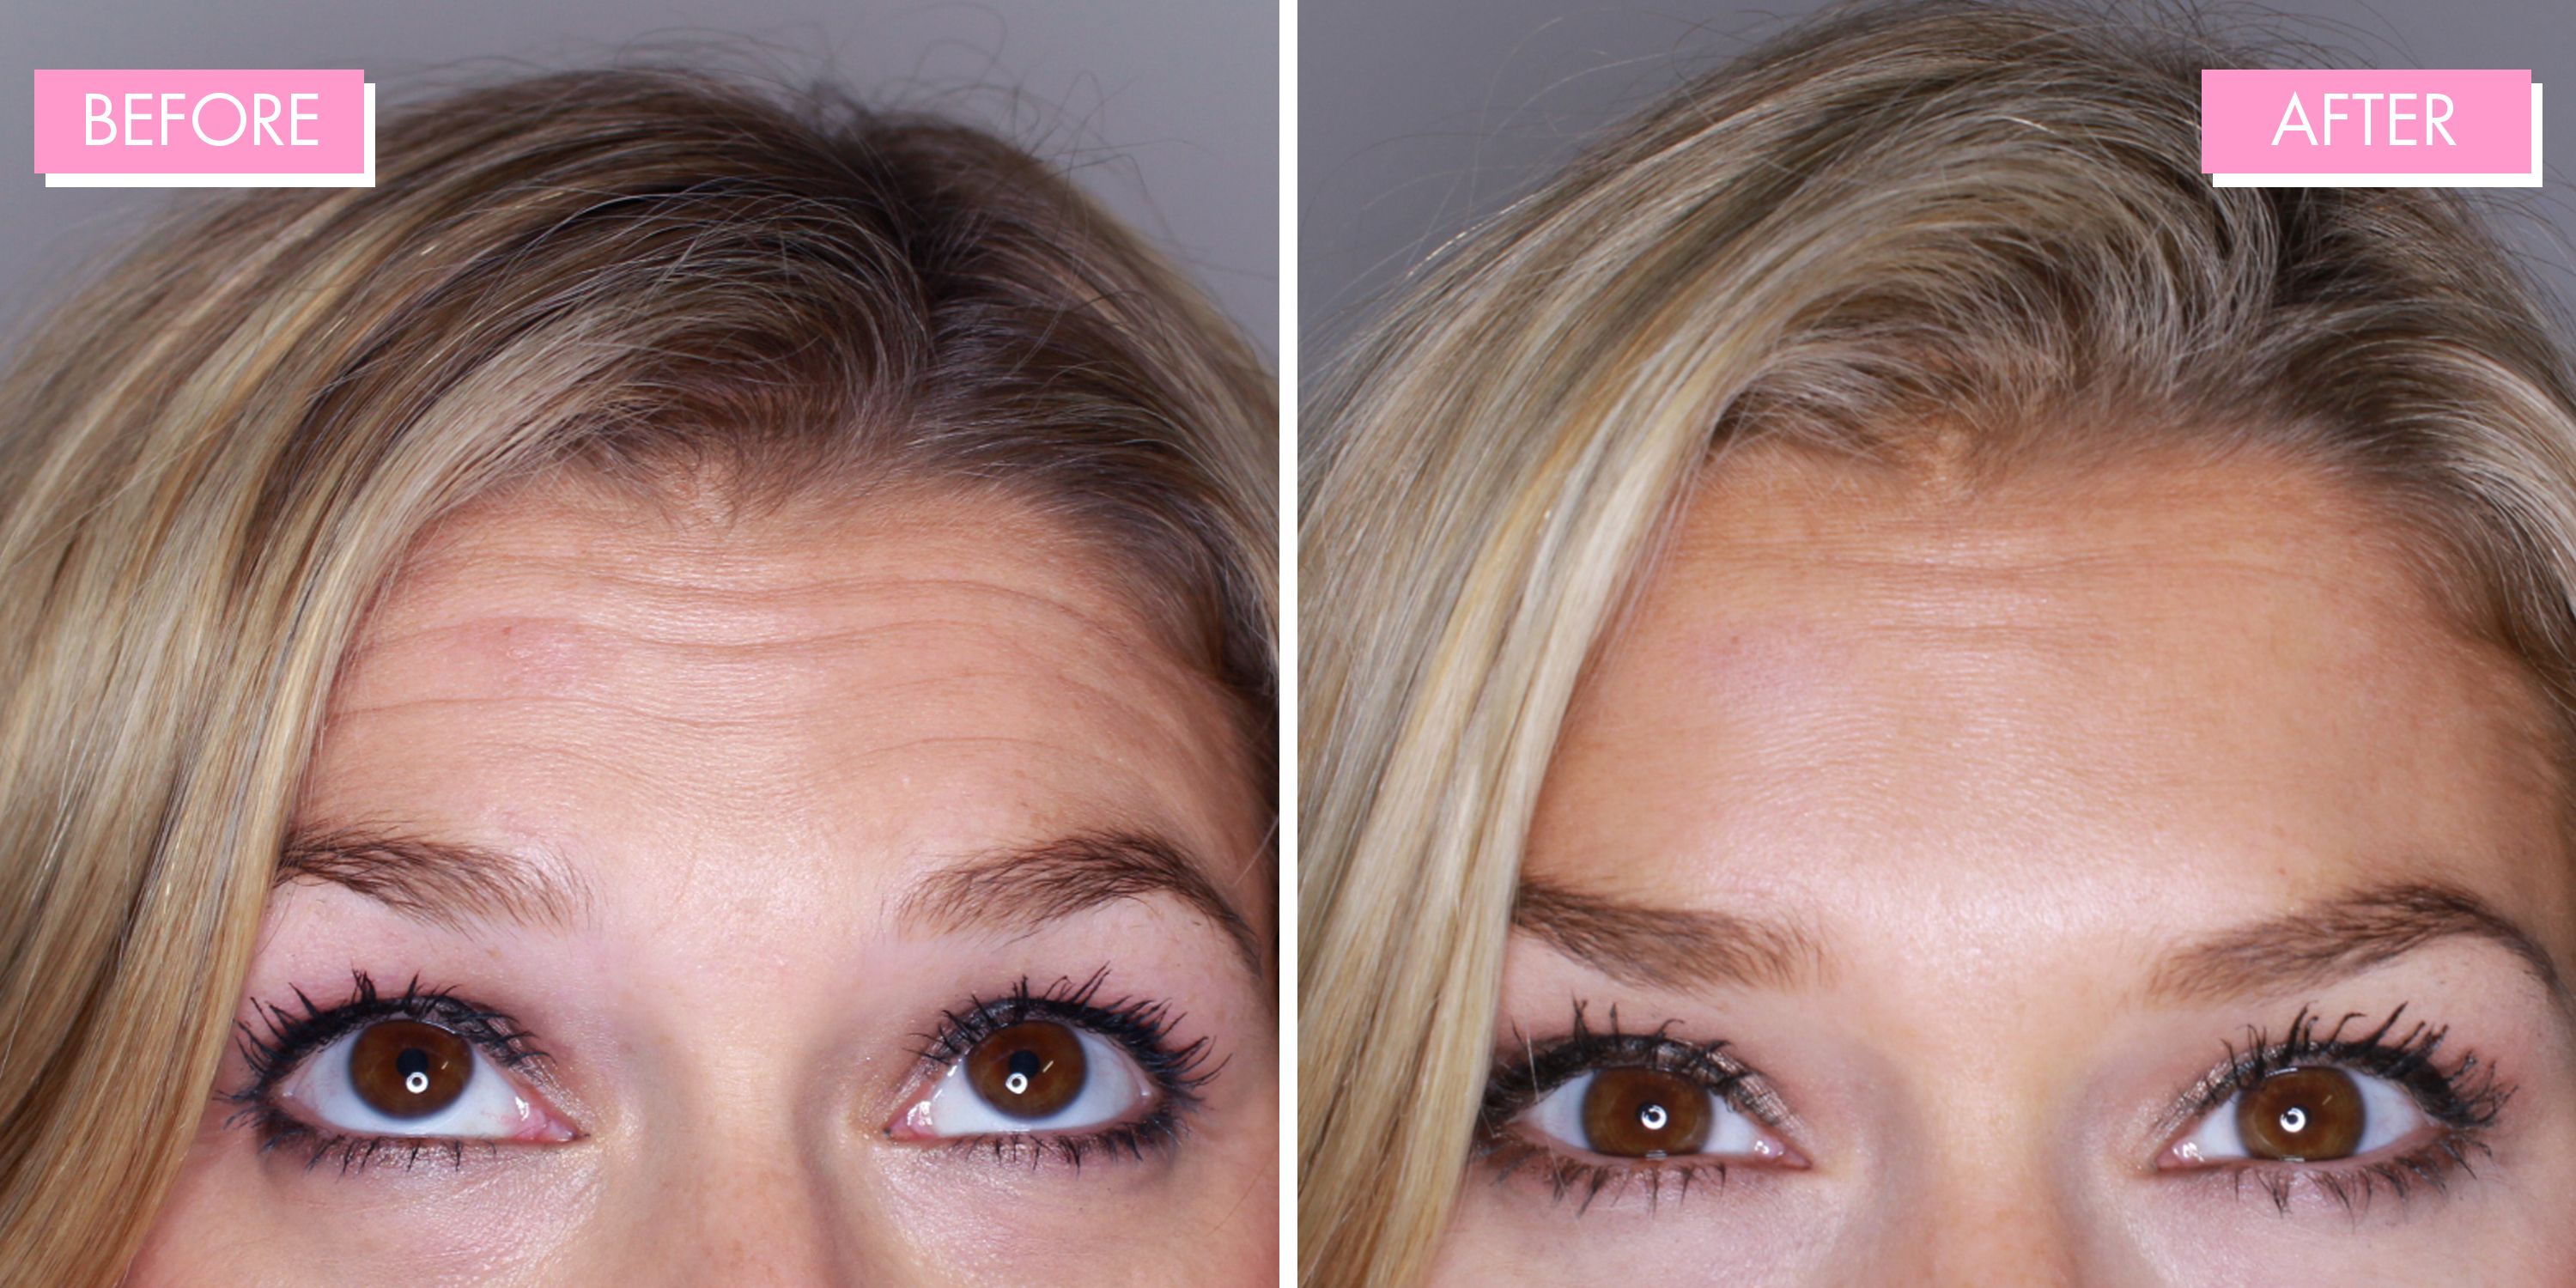 Hair Botox Review NonChemical Smoothing Treatment